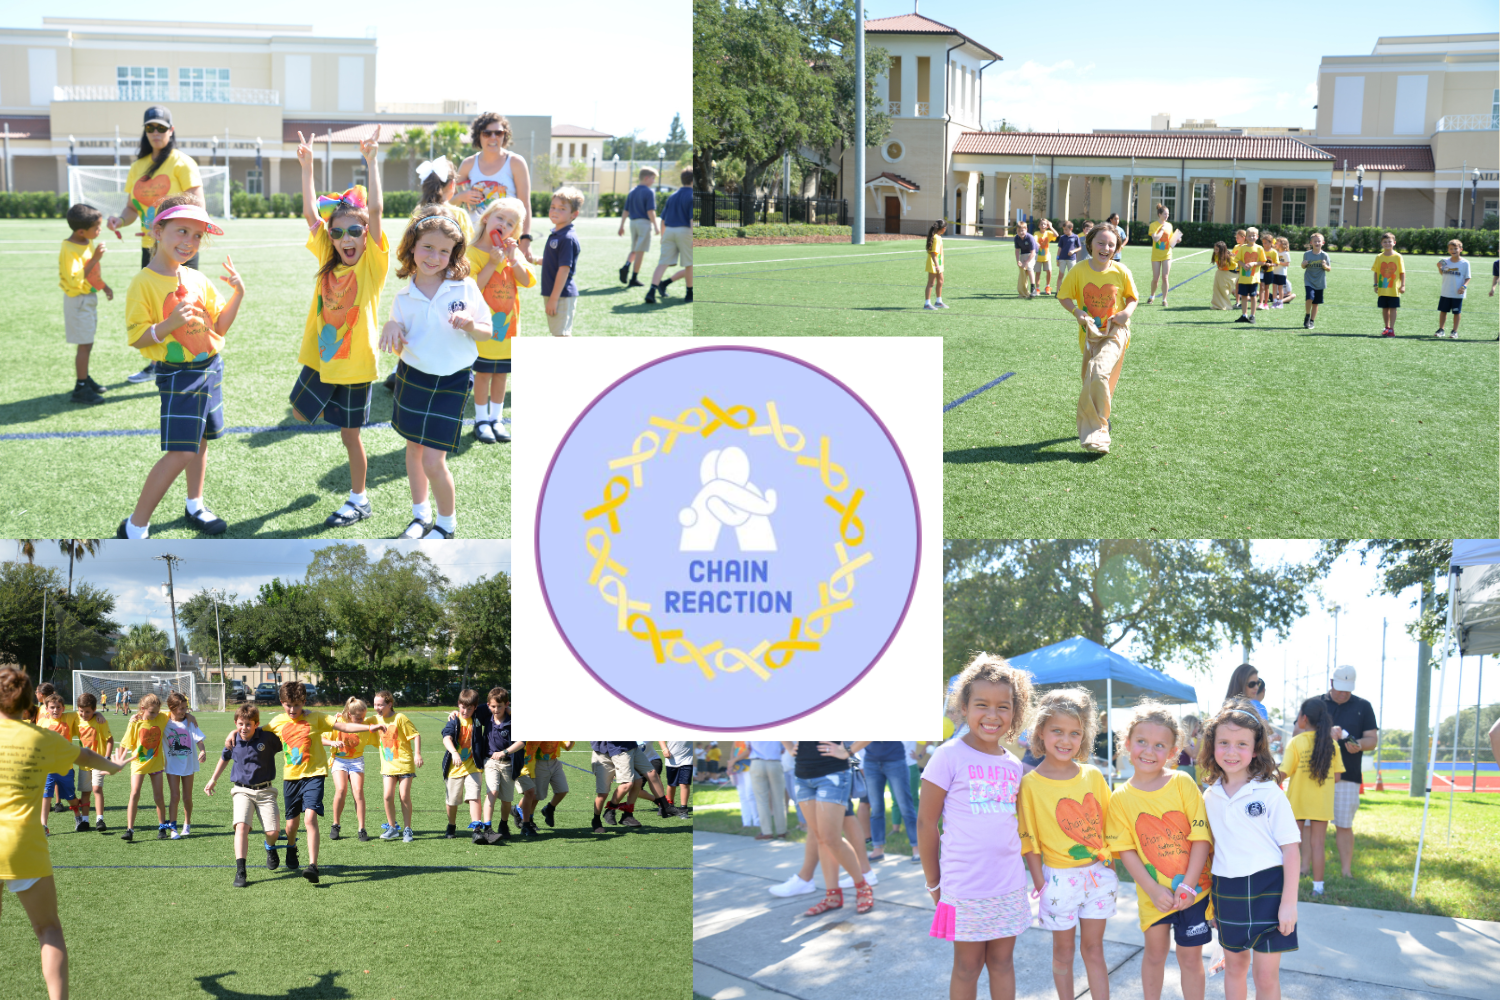 Chain Reaction field day will be held on September 15th with fun games and delicious food.   